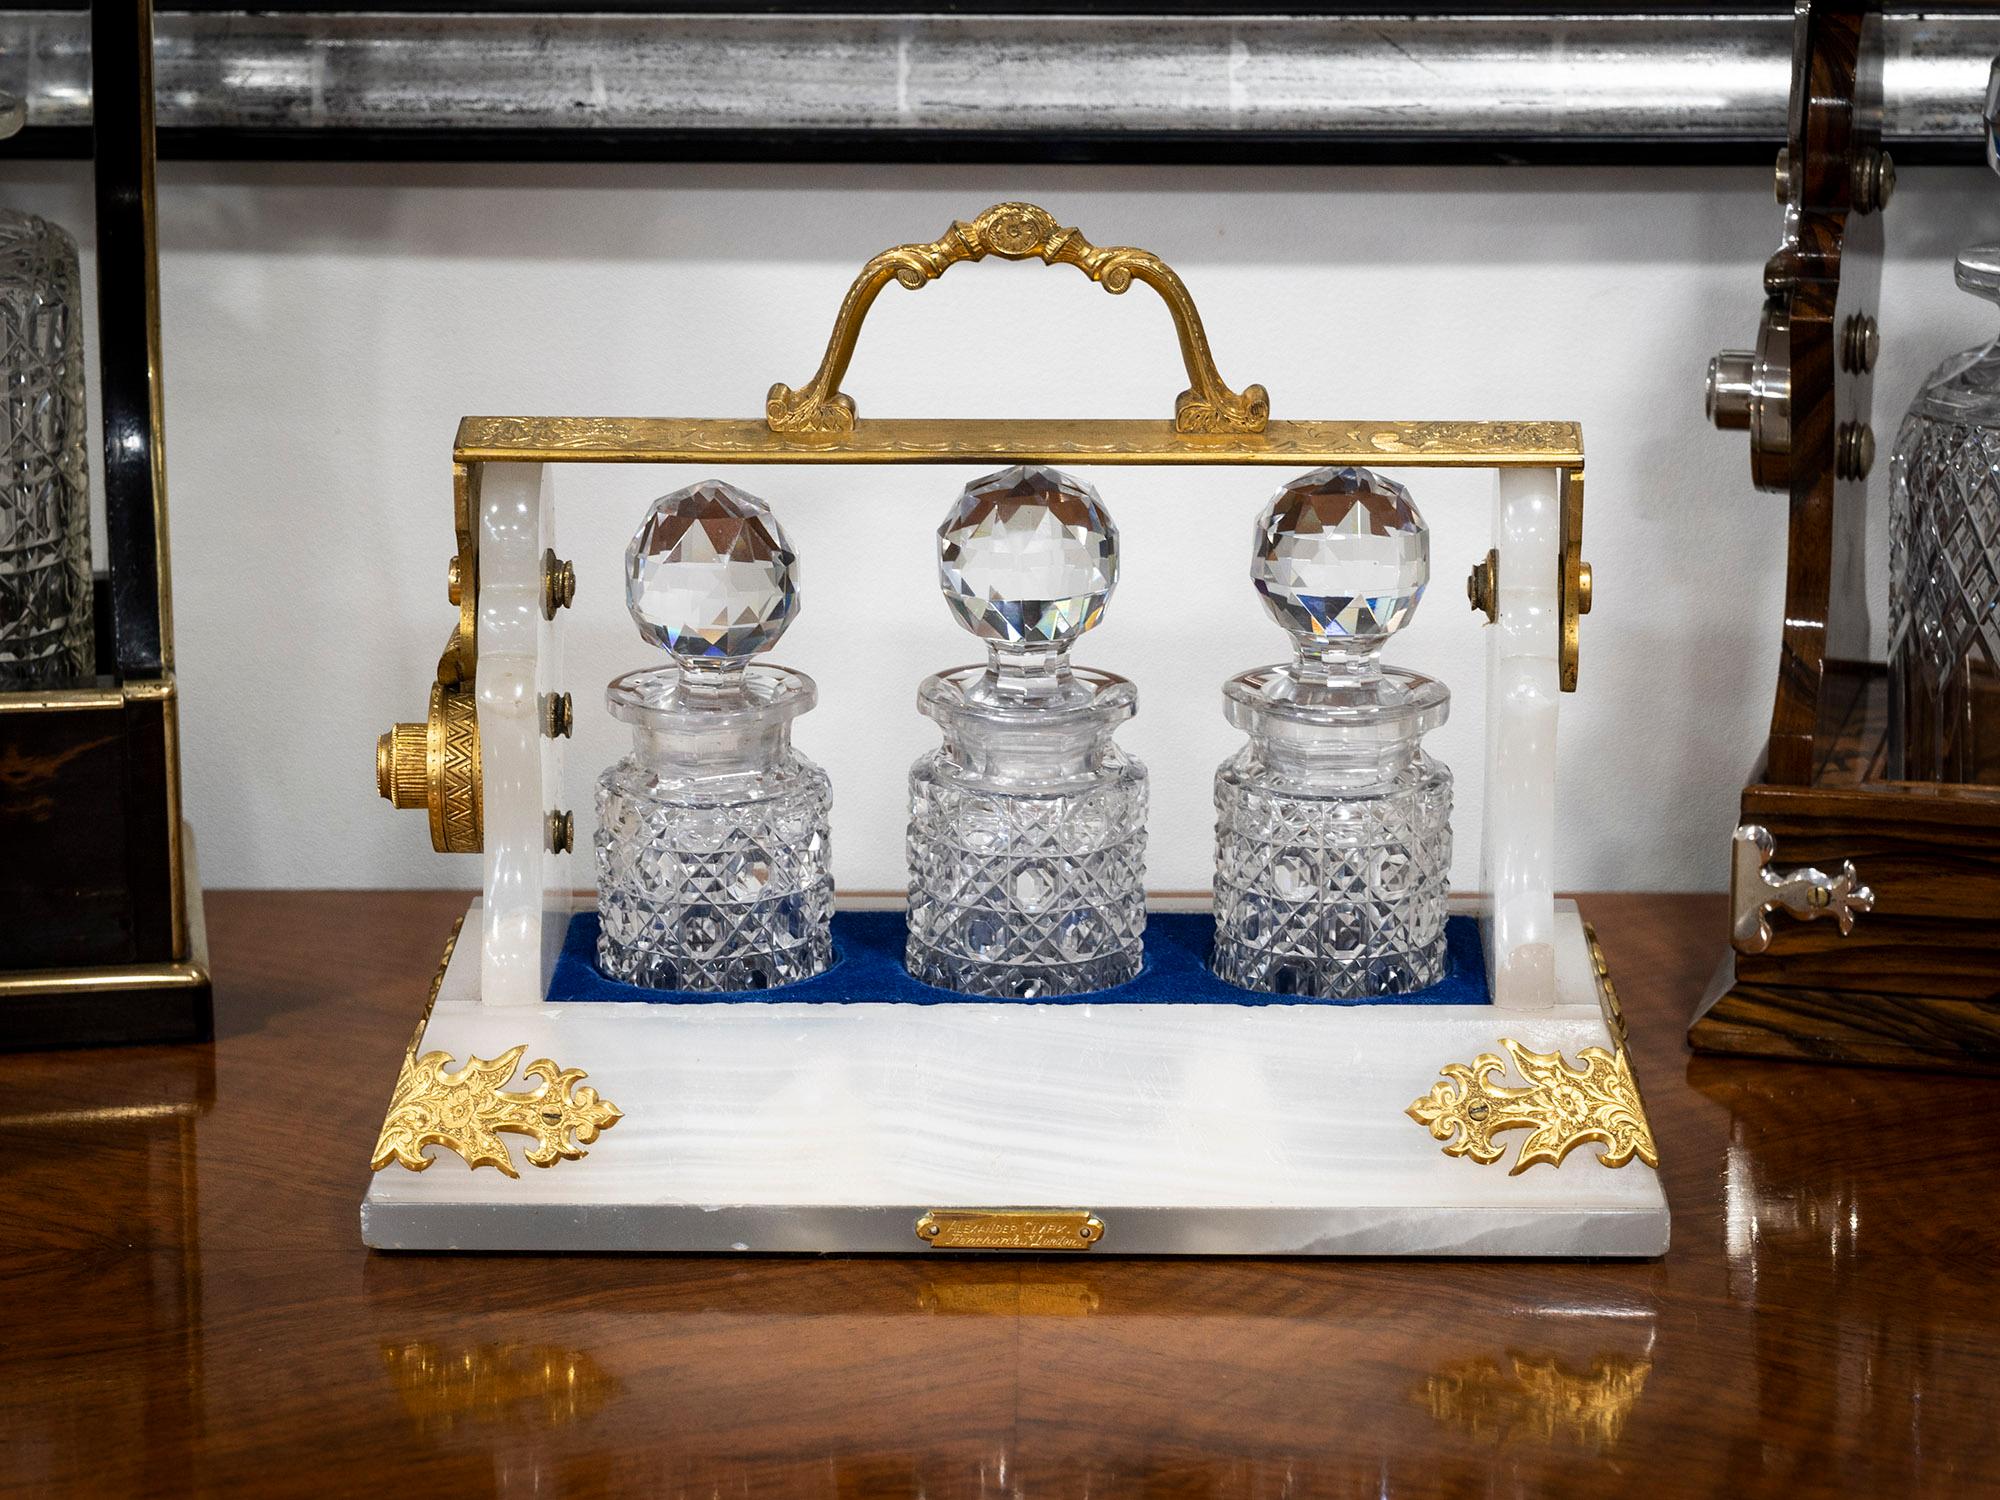 The Tantalus is of typical form however it is of rare miniature size measuring only 22cm high x 26cm wide. The Tantalus is made from white onyx with scrolling ormolu mounts and an ormolu hinged carry handle. The carry handle is beautifully engraved